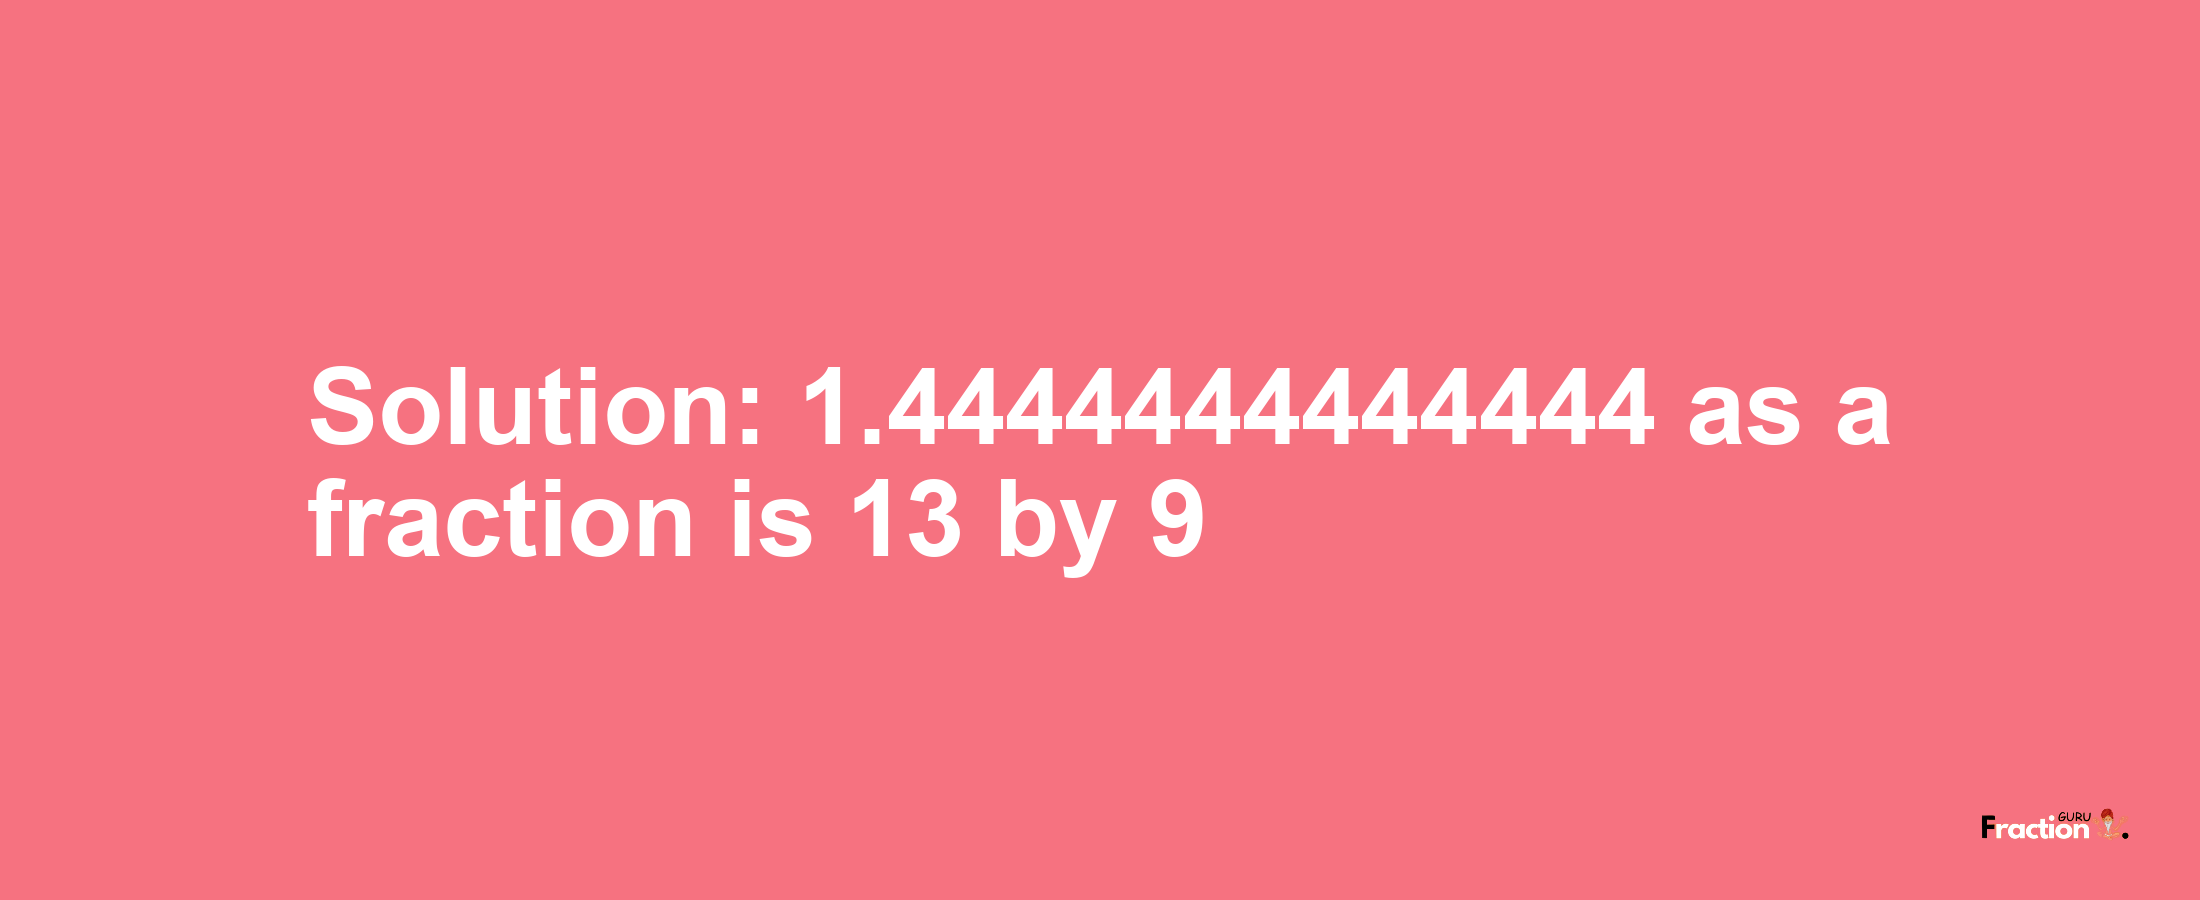 Solution:1.4444444444444 as a fraction is 13/9